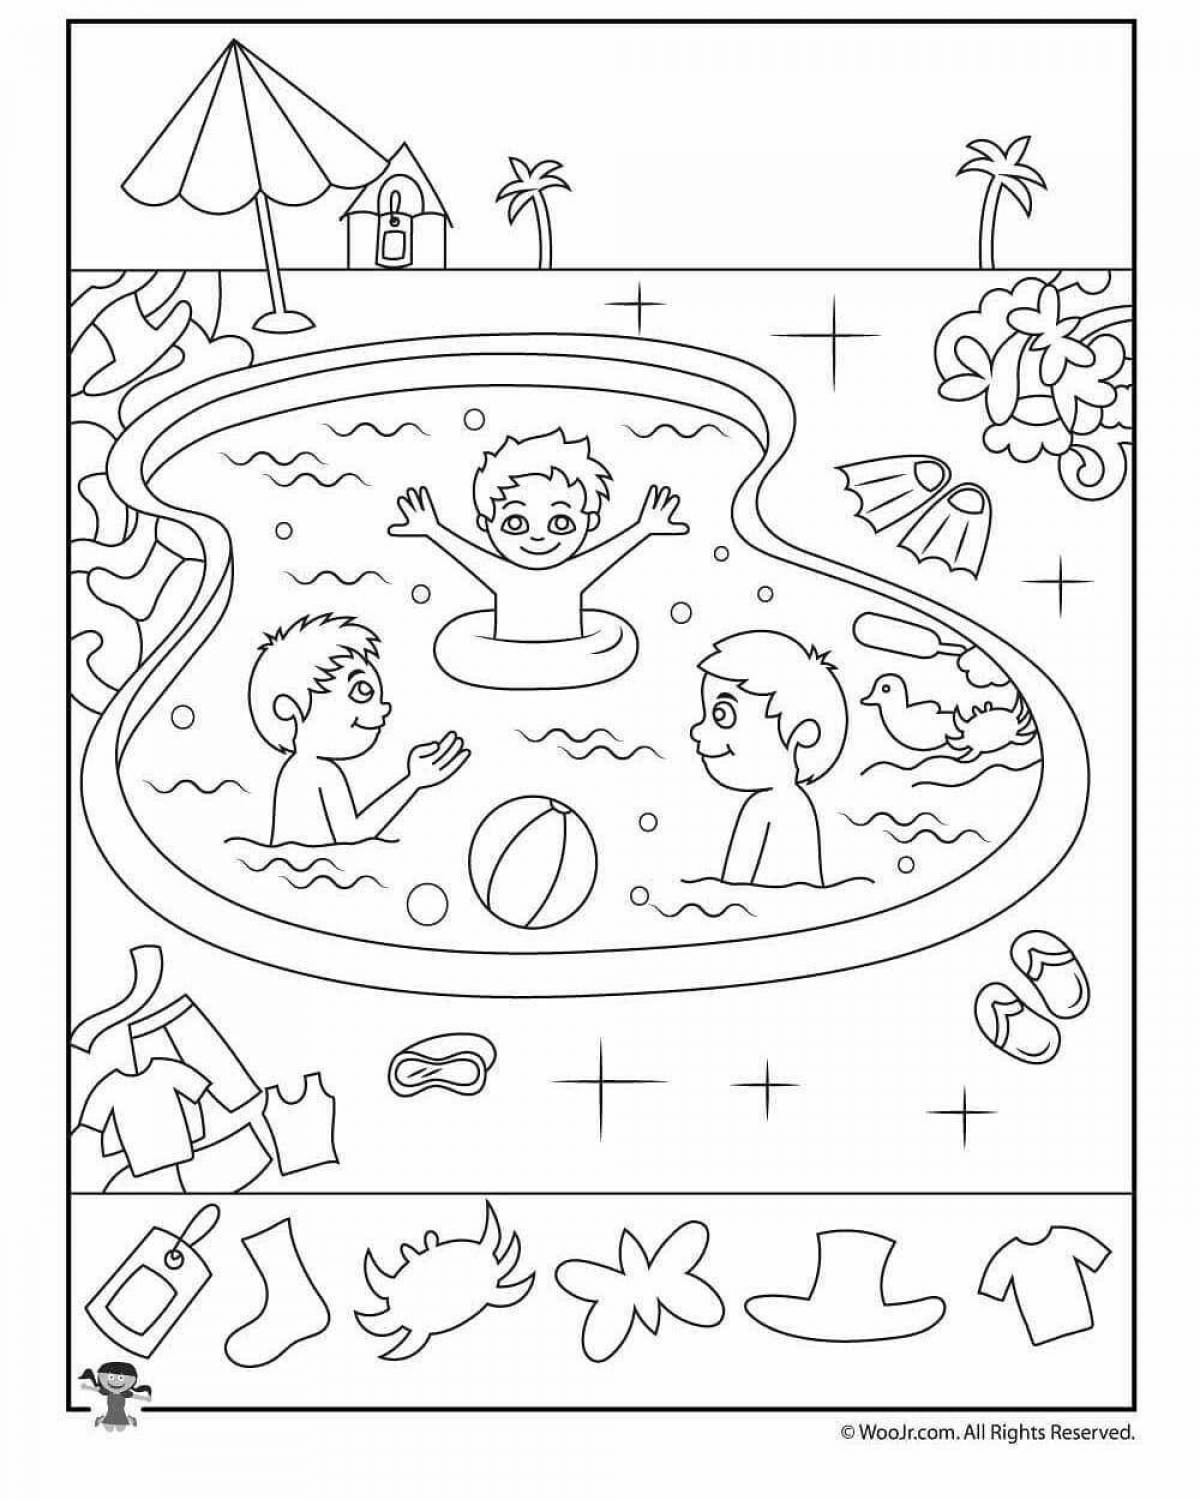 Fun coloring pages for 6 year olds